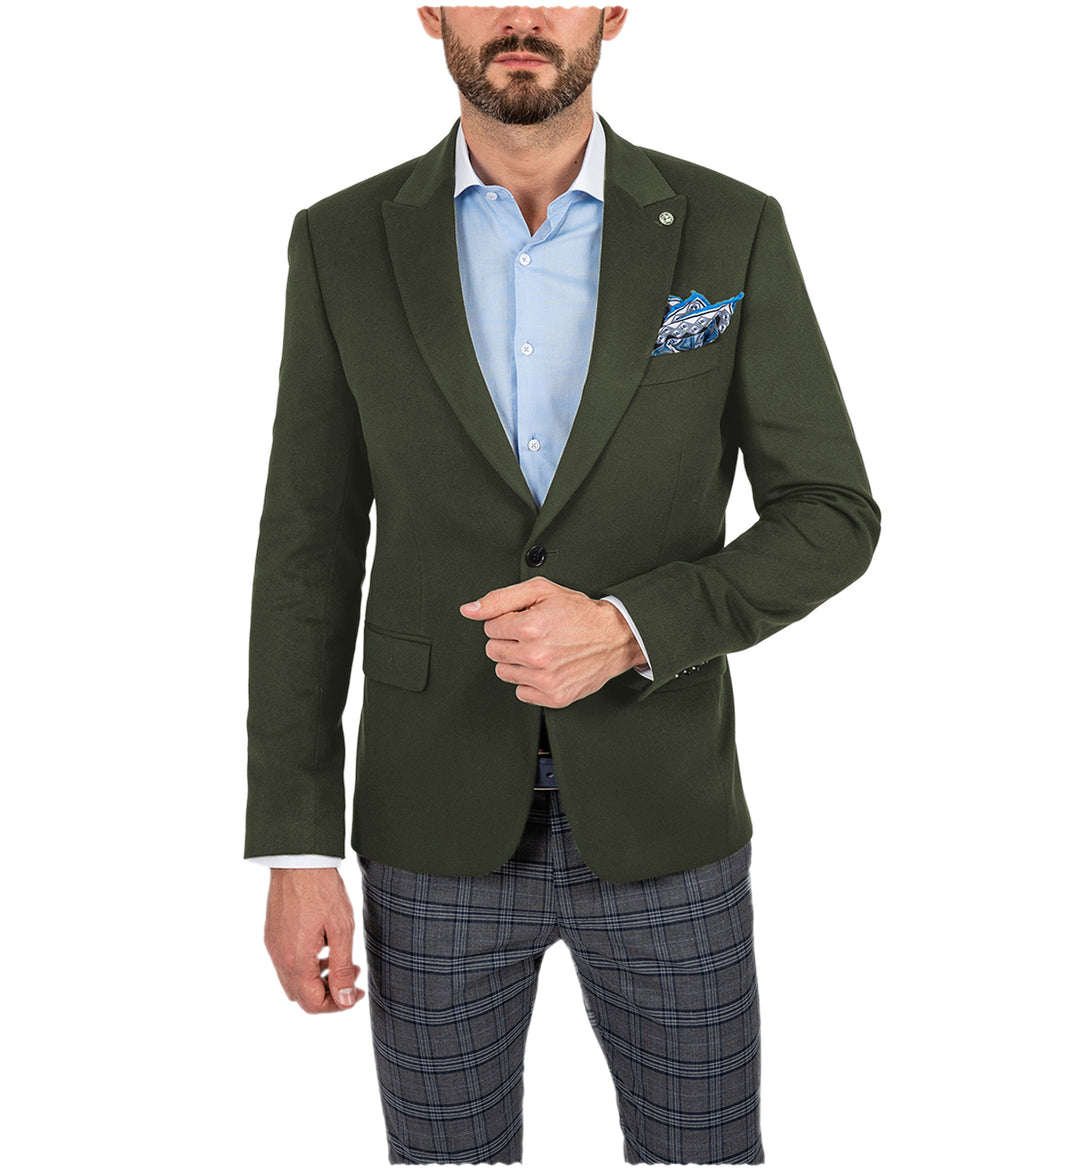 What kind of suit is an ideal travel suit?